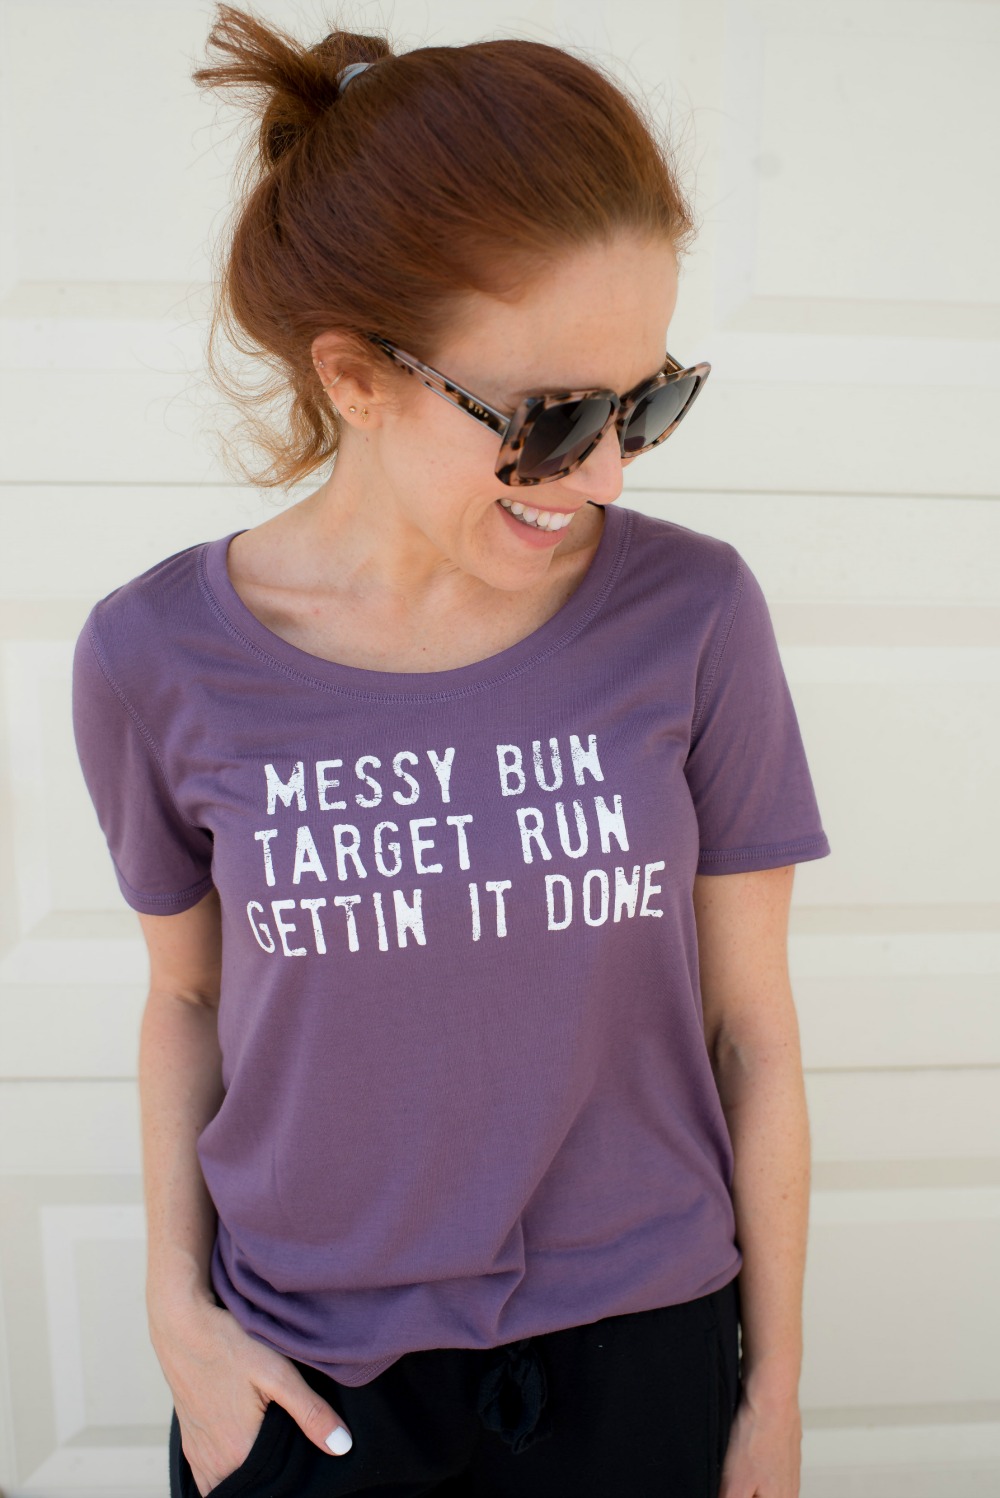 Messy Bun Target Run Gettin It Done tee // the modern savvy life and style blog #casualoutfit #weekendwear #momonthego - Casual Weekend Outfit featured by popular Florida style blogger The Modern Savvy